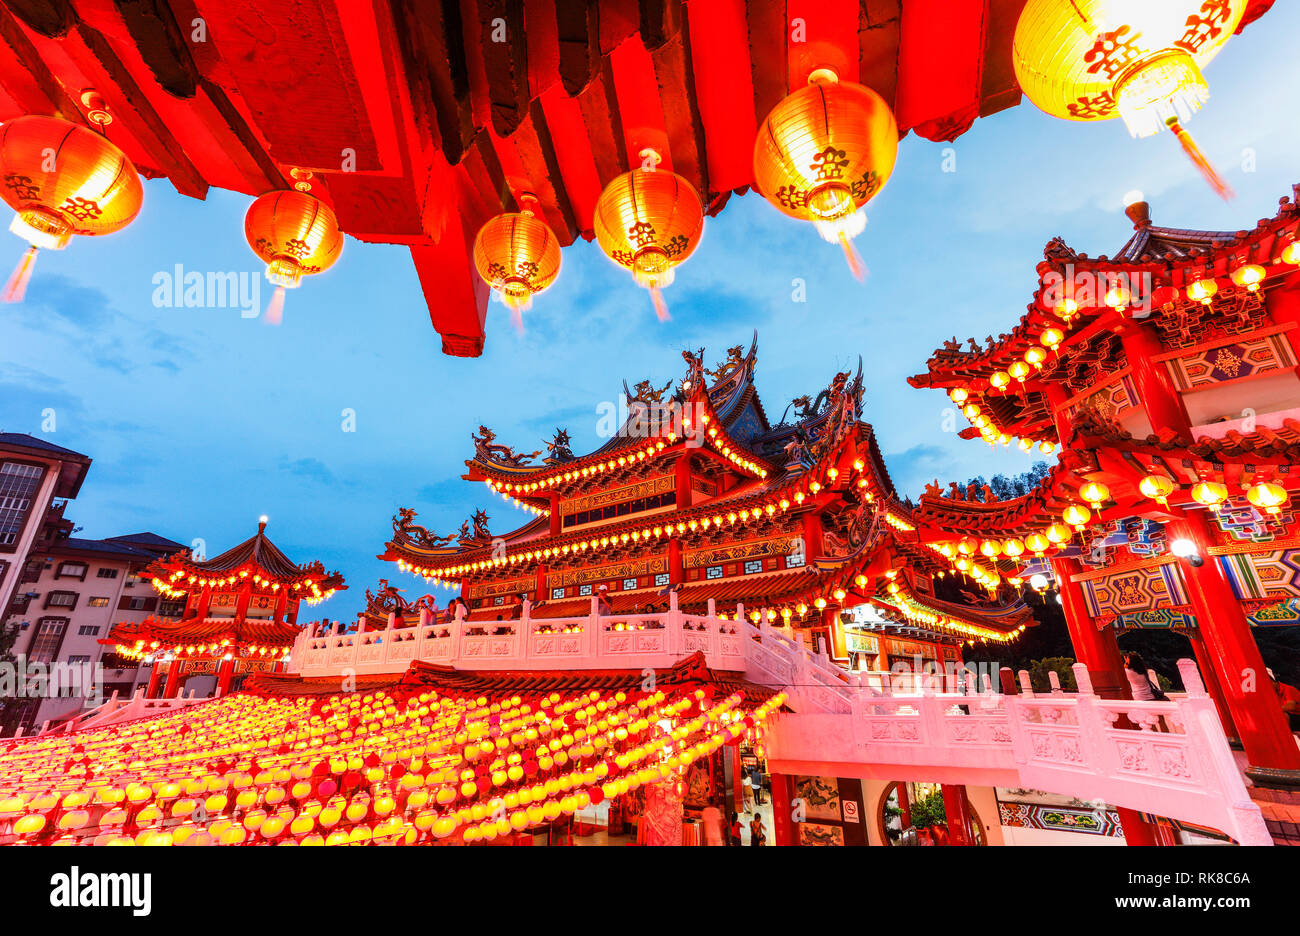 Lanterns glow at Thean Hou Temple, Kuala Lumpur during the Chinese New Year. Stock Photo